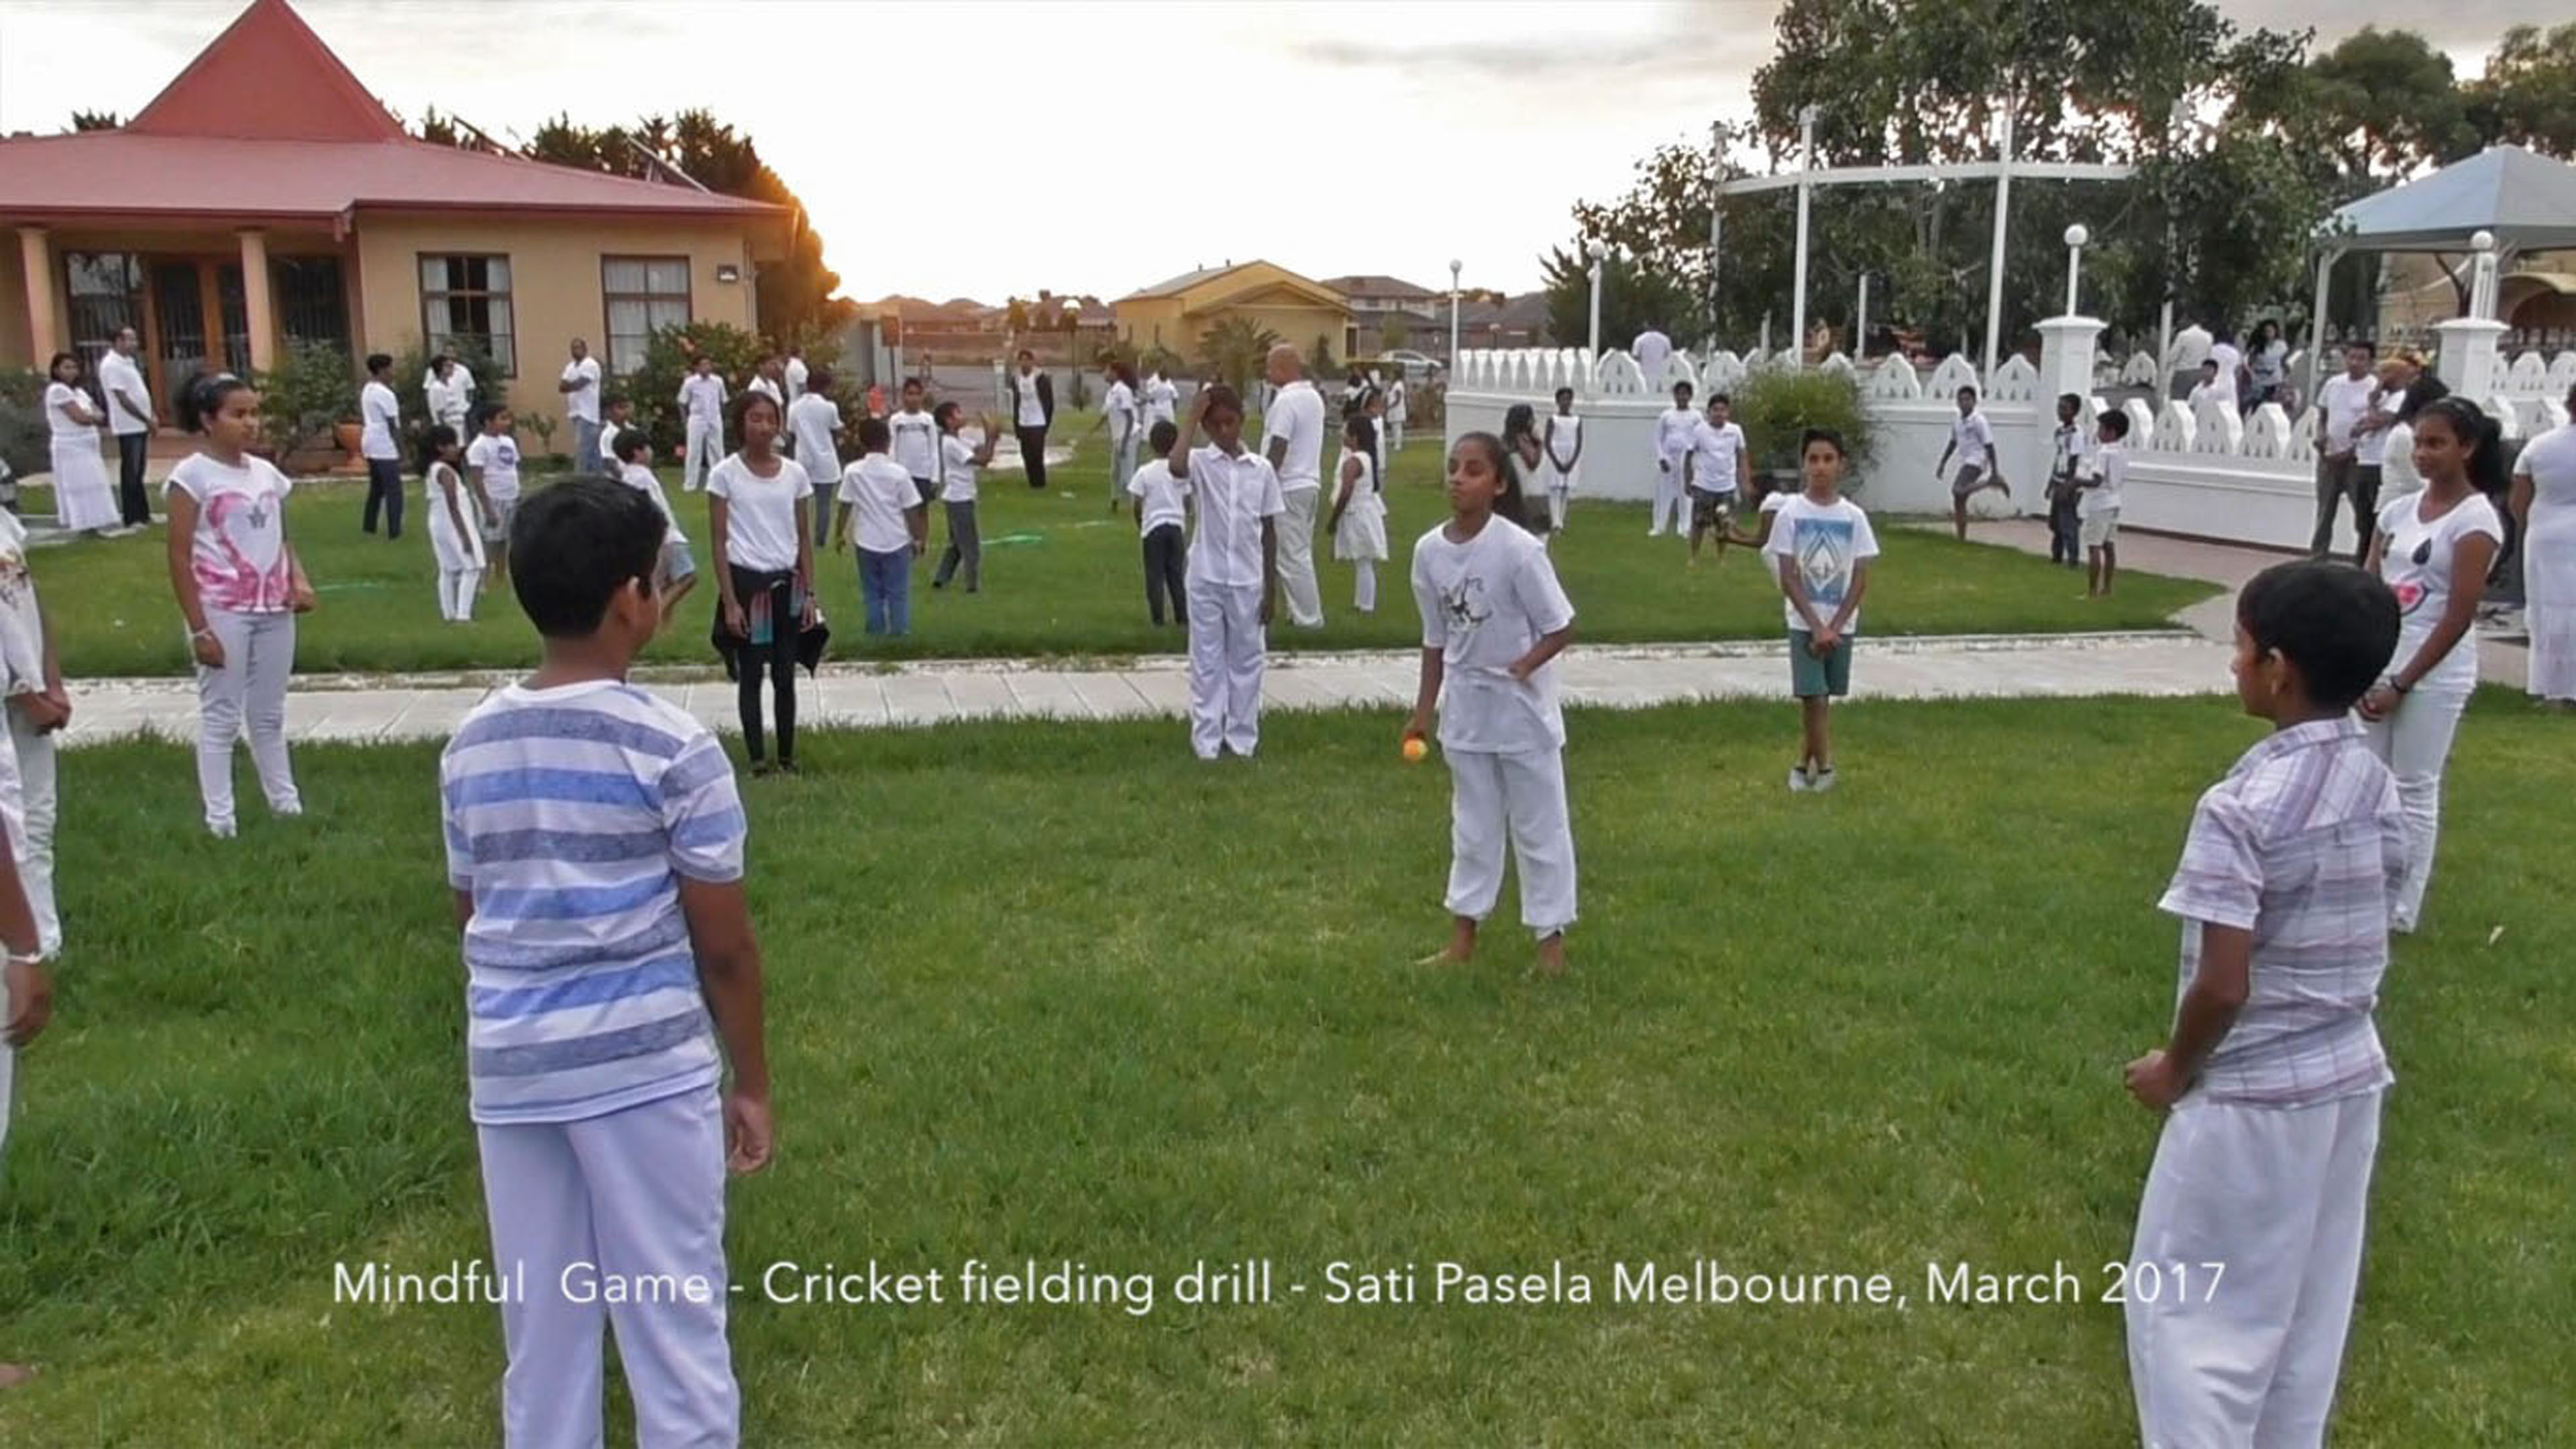 Cricket Fielding (Mindful Game)